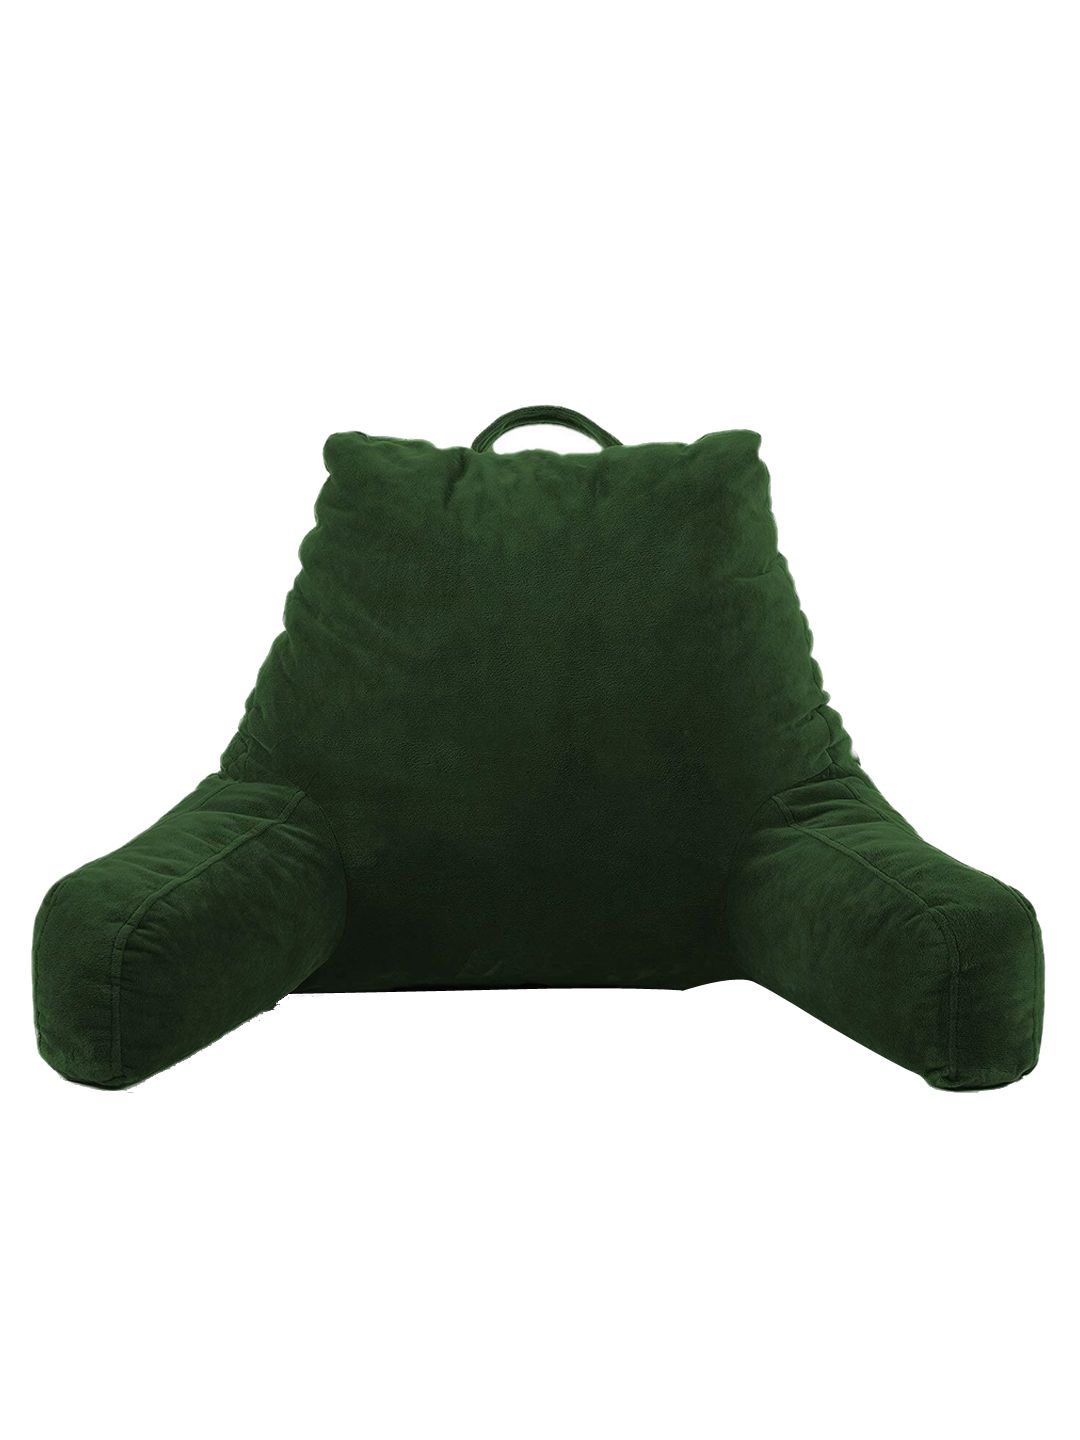 Pum Pum Green Back Rest Support Reading Pillow Price in India